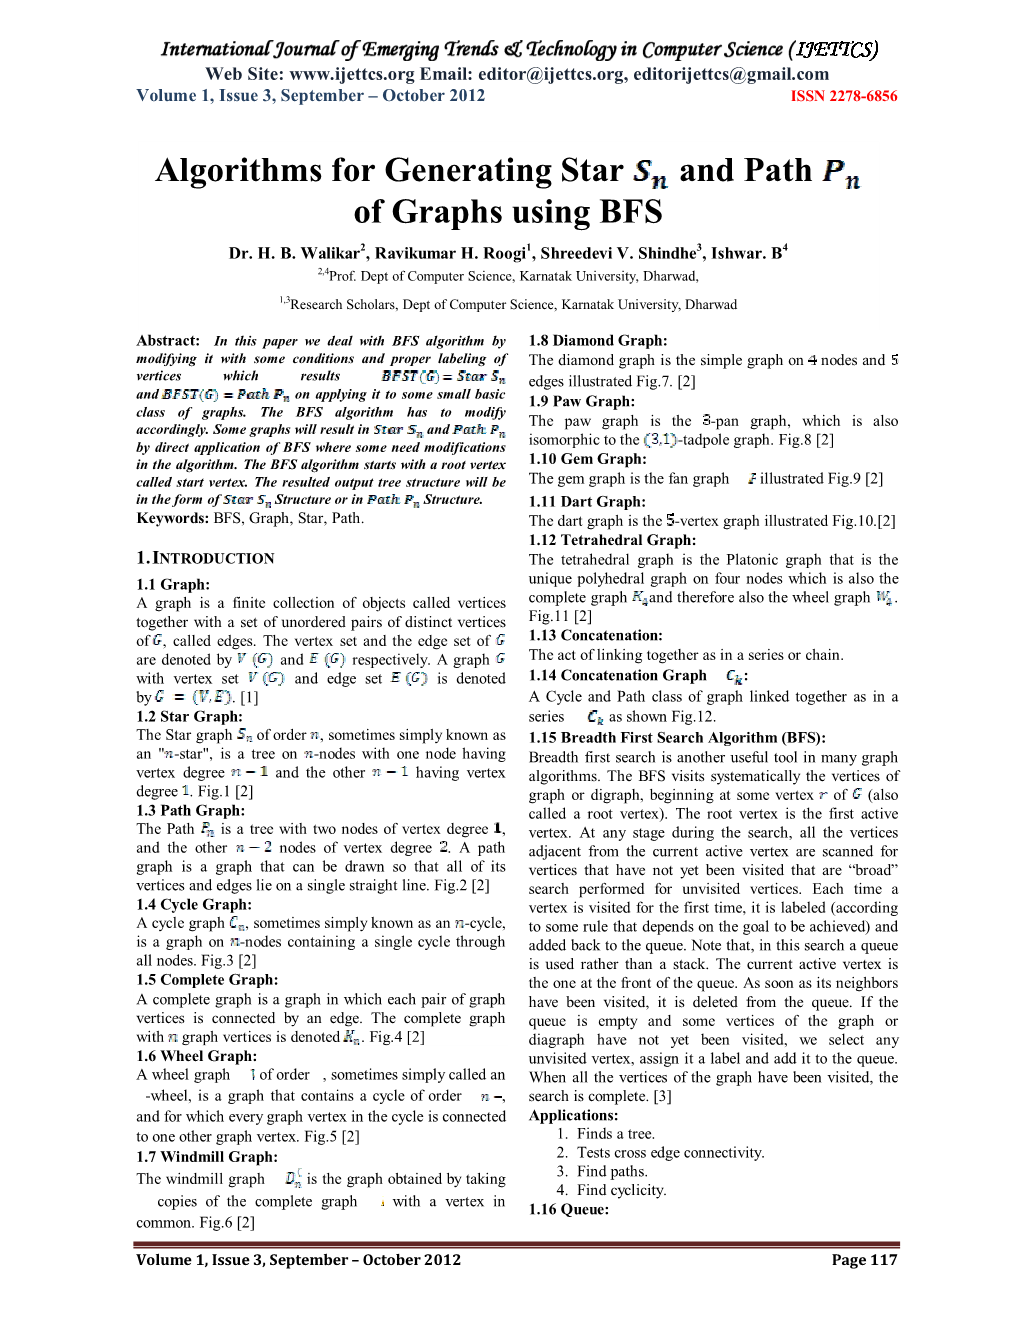 Algorithms for Generating Star and Path of Graphs Using BFS Dr